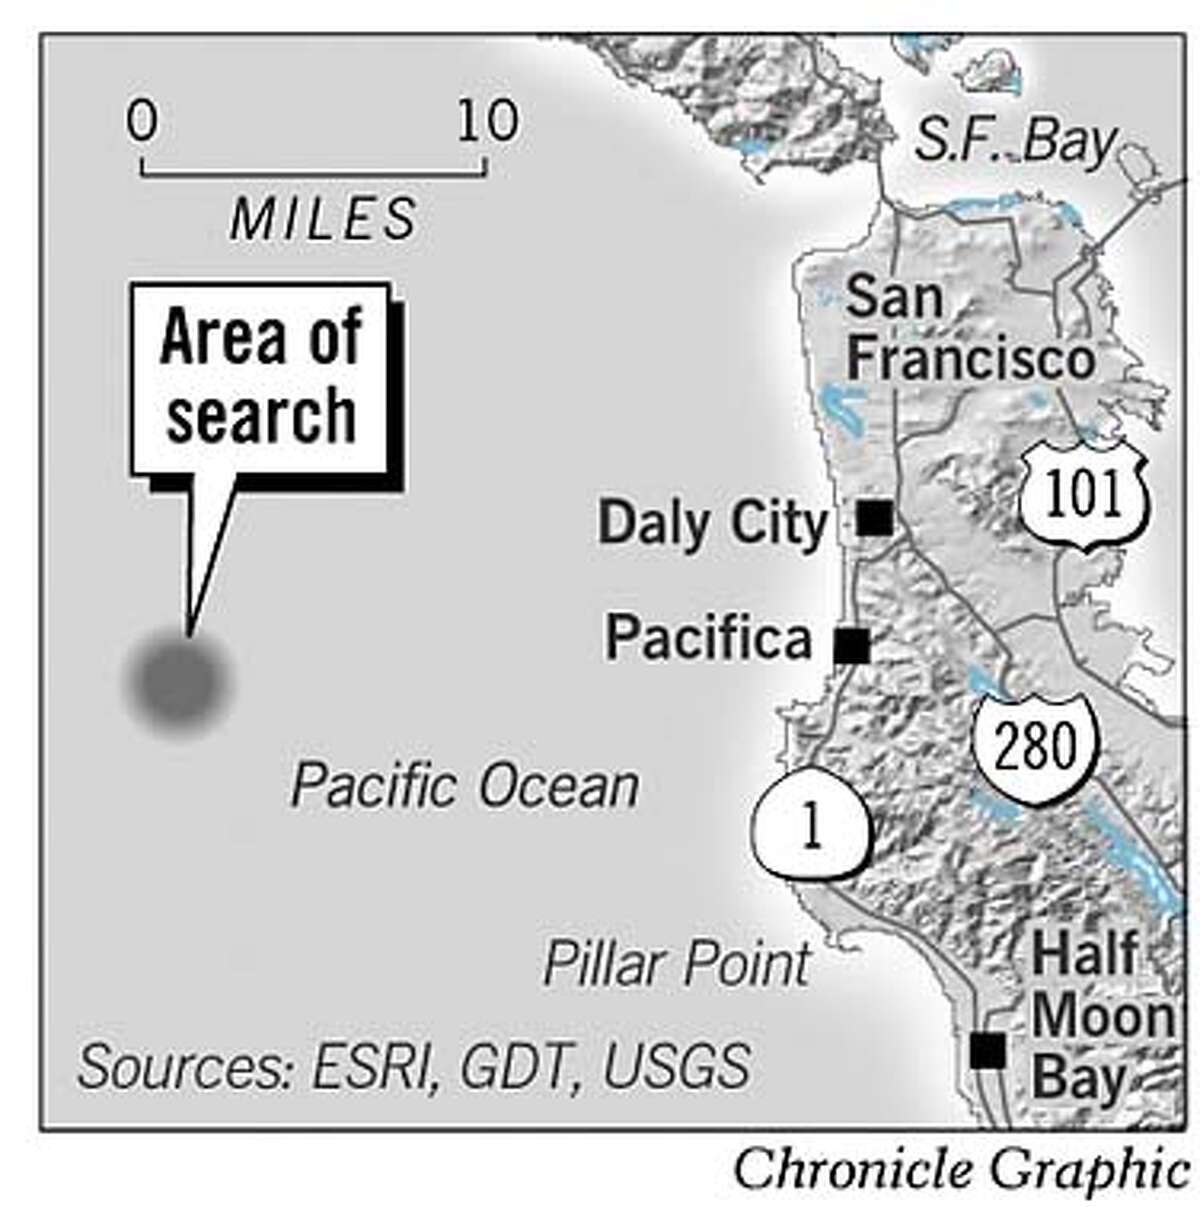 Search For Sunken Sub. Chronicle Graphic